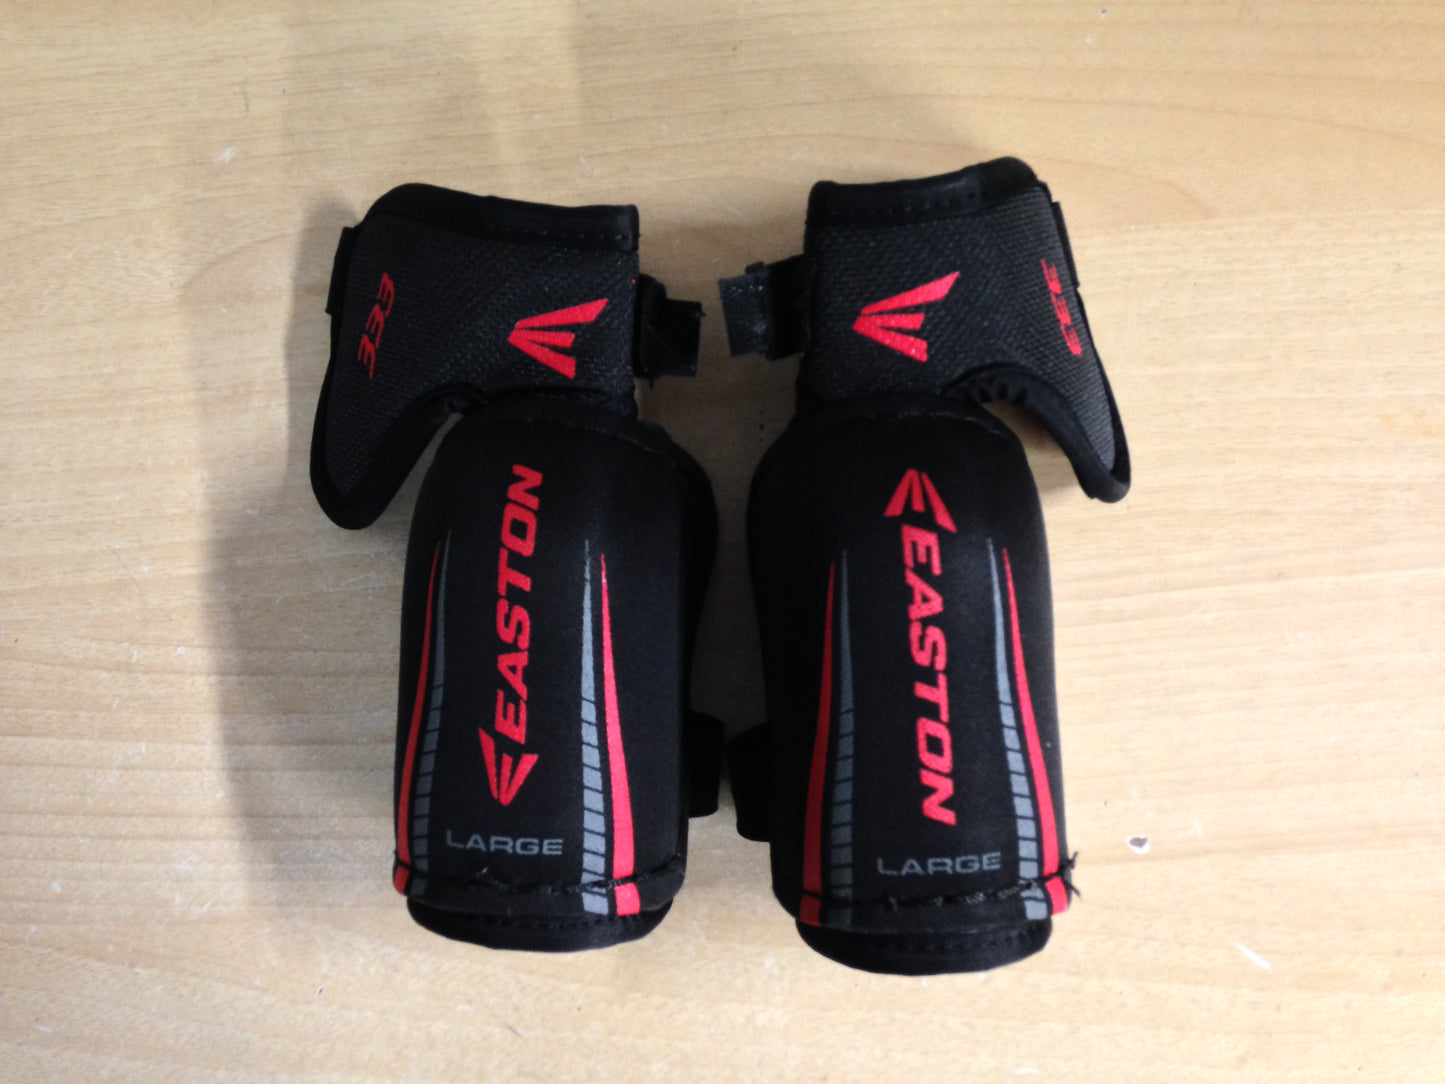 Hockey Elbow Pad Child Size Y Large 5-6 Easton Black Red Excellent